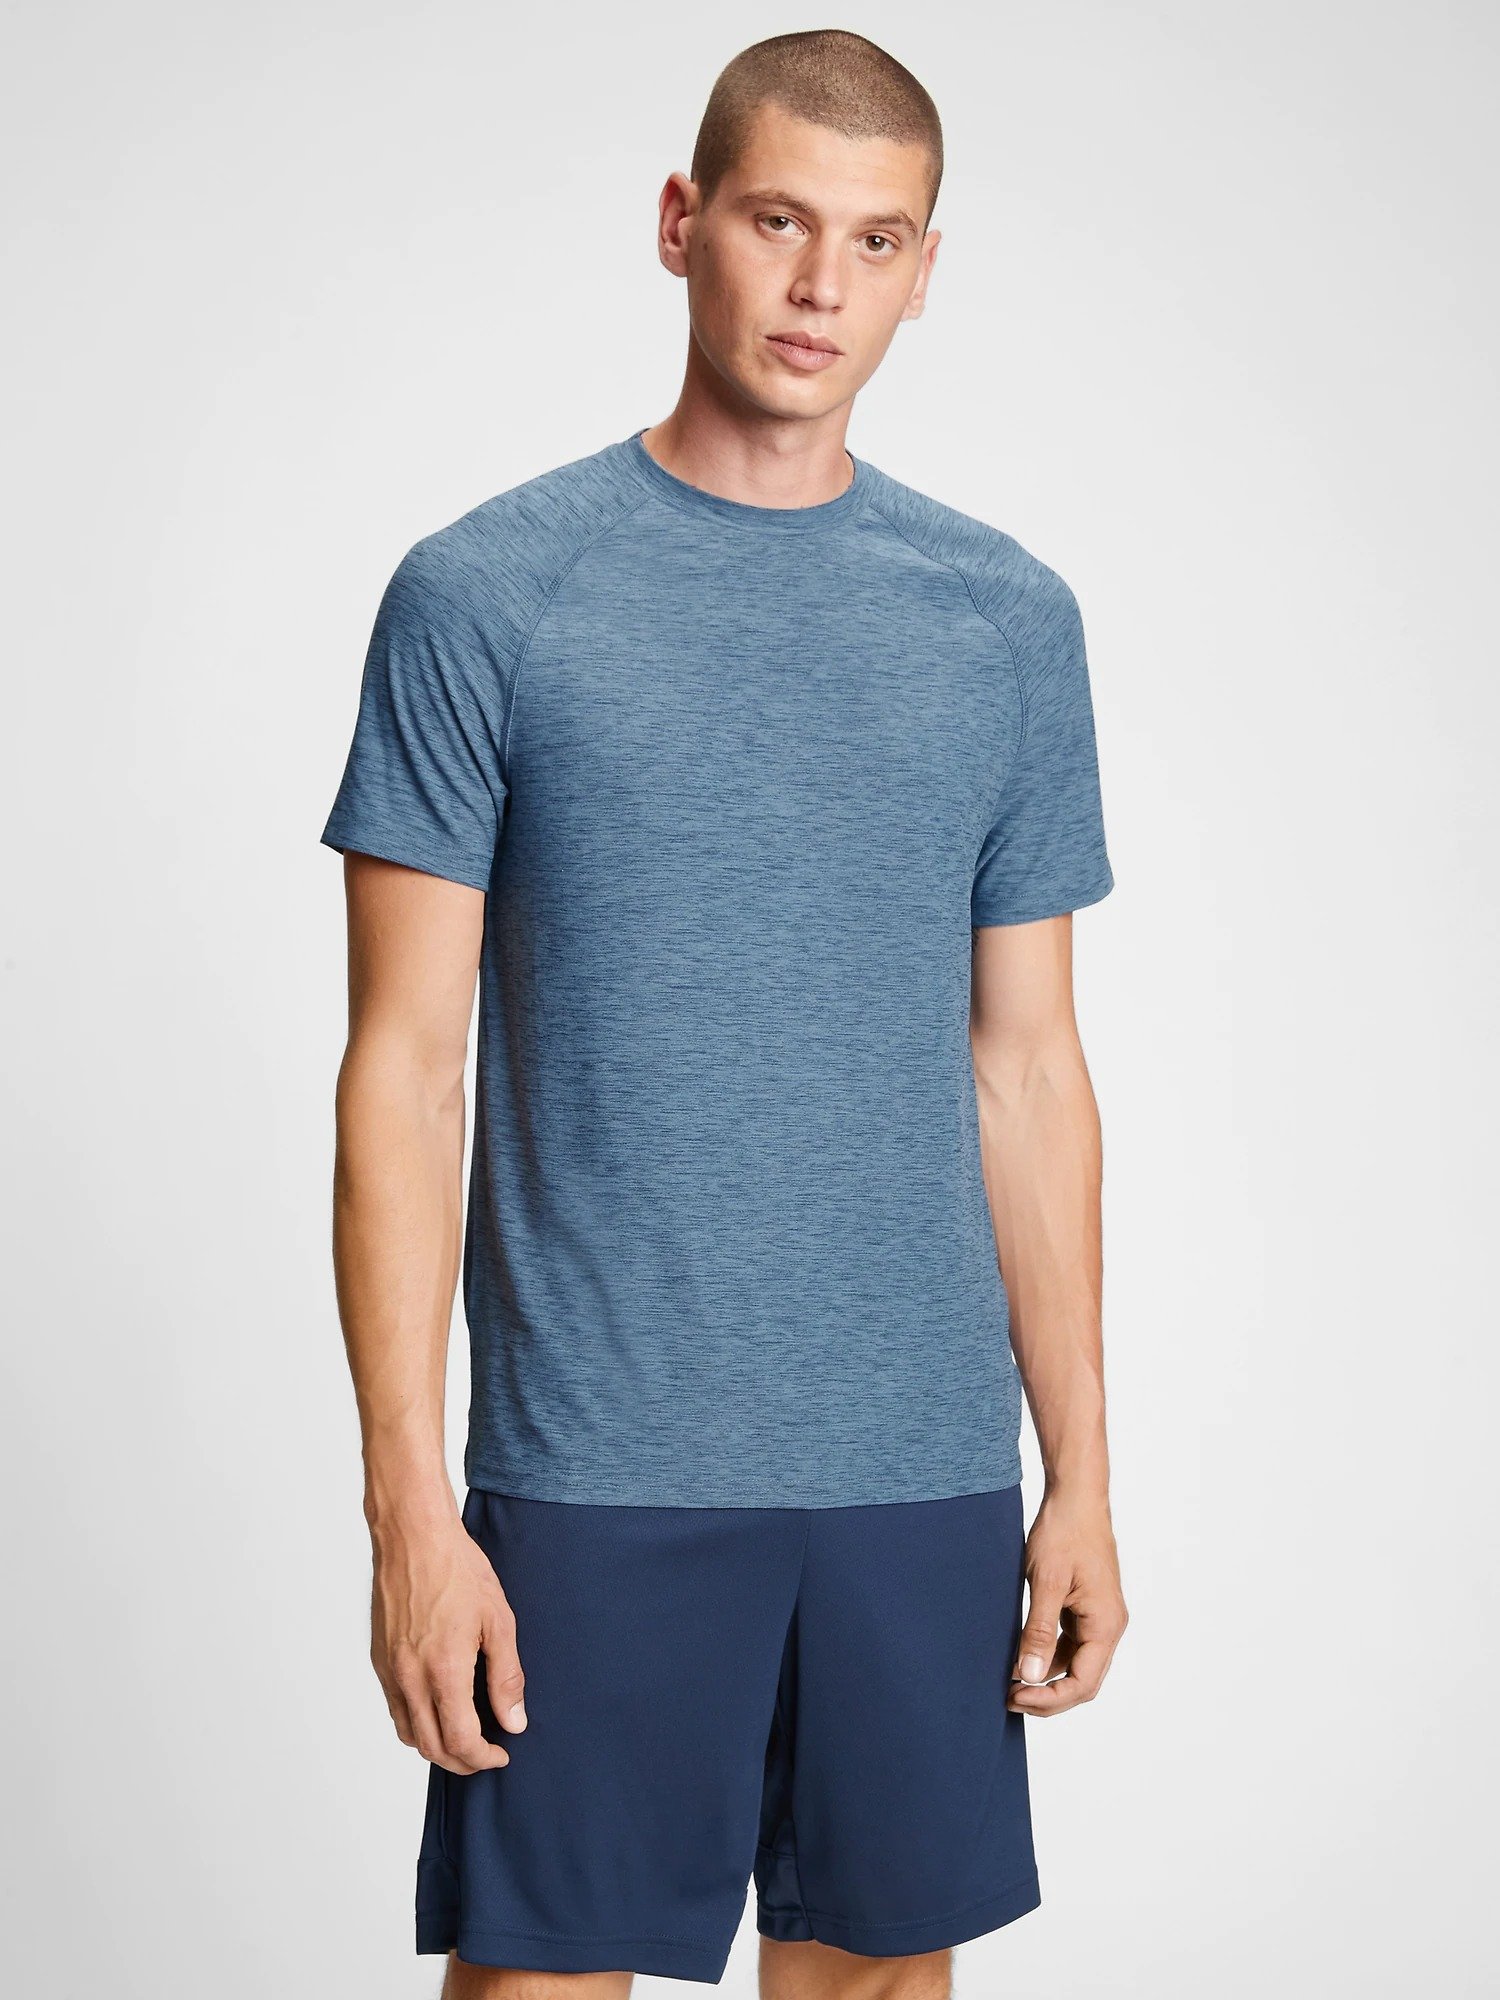 GapFit All Day T-Shirt product image